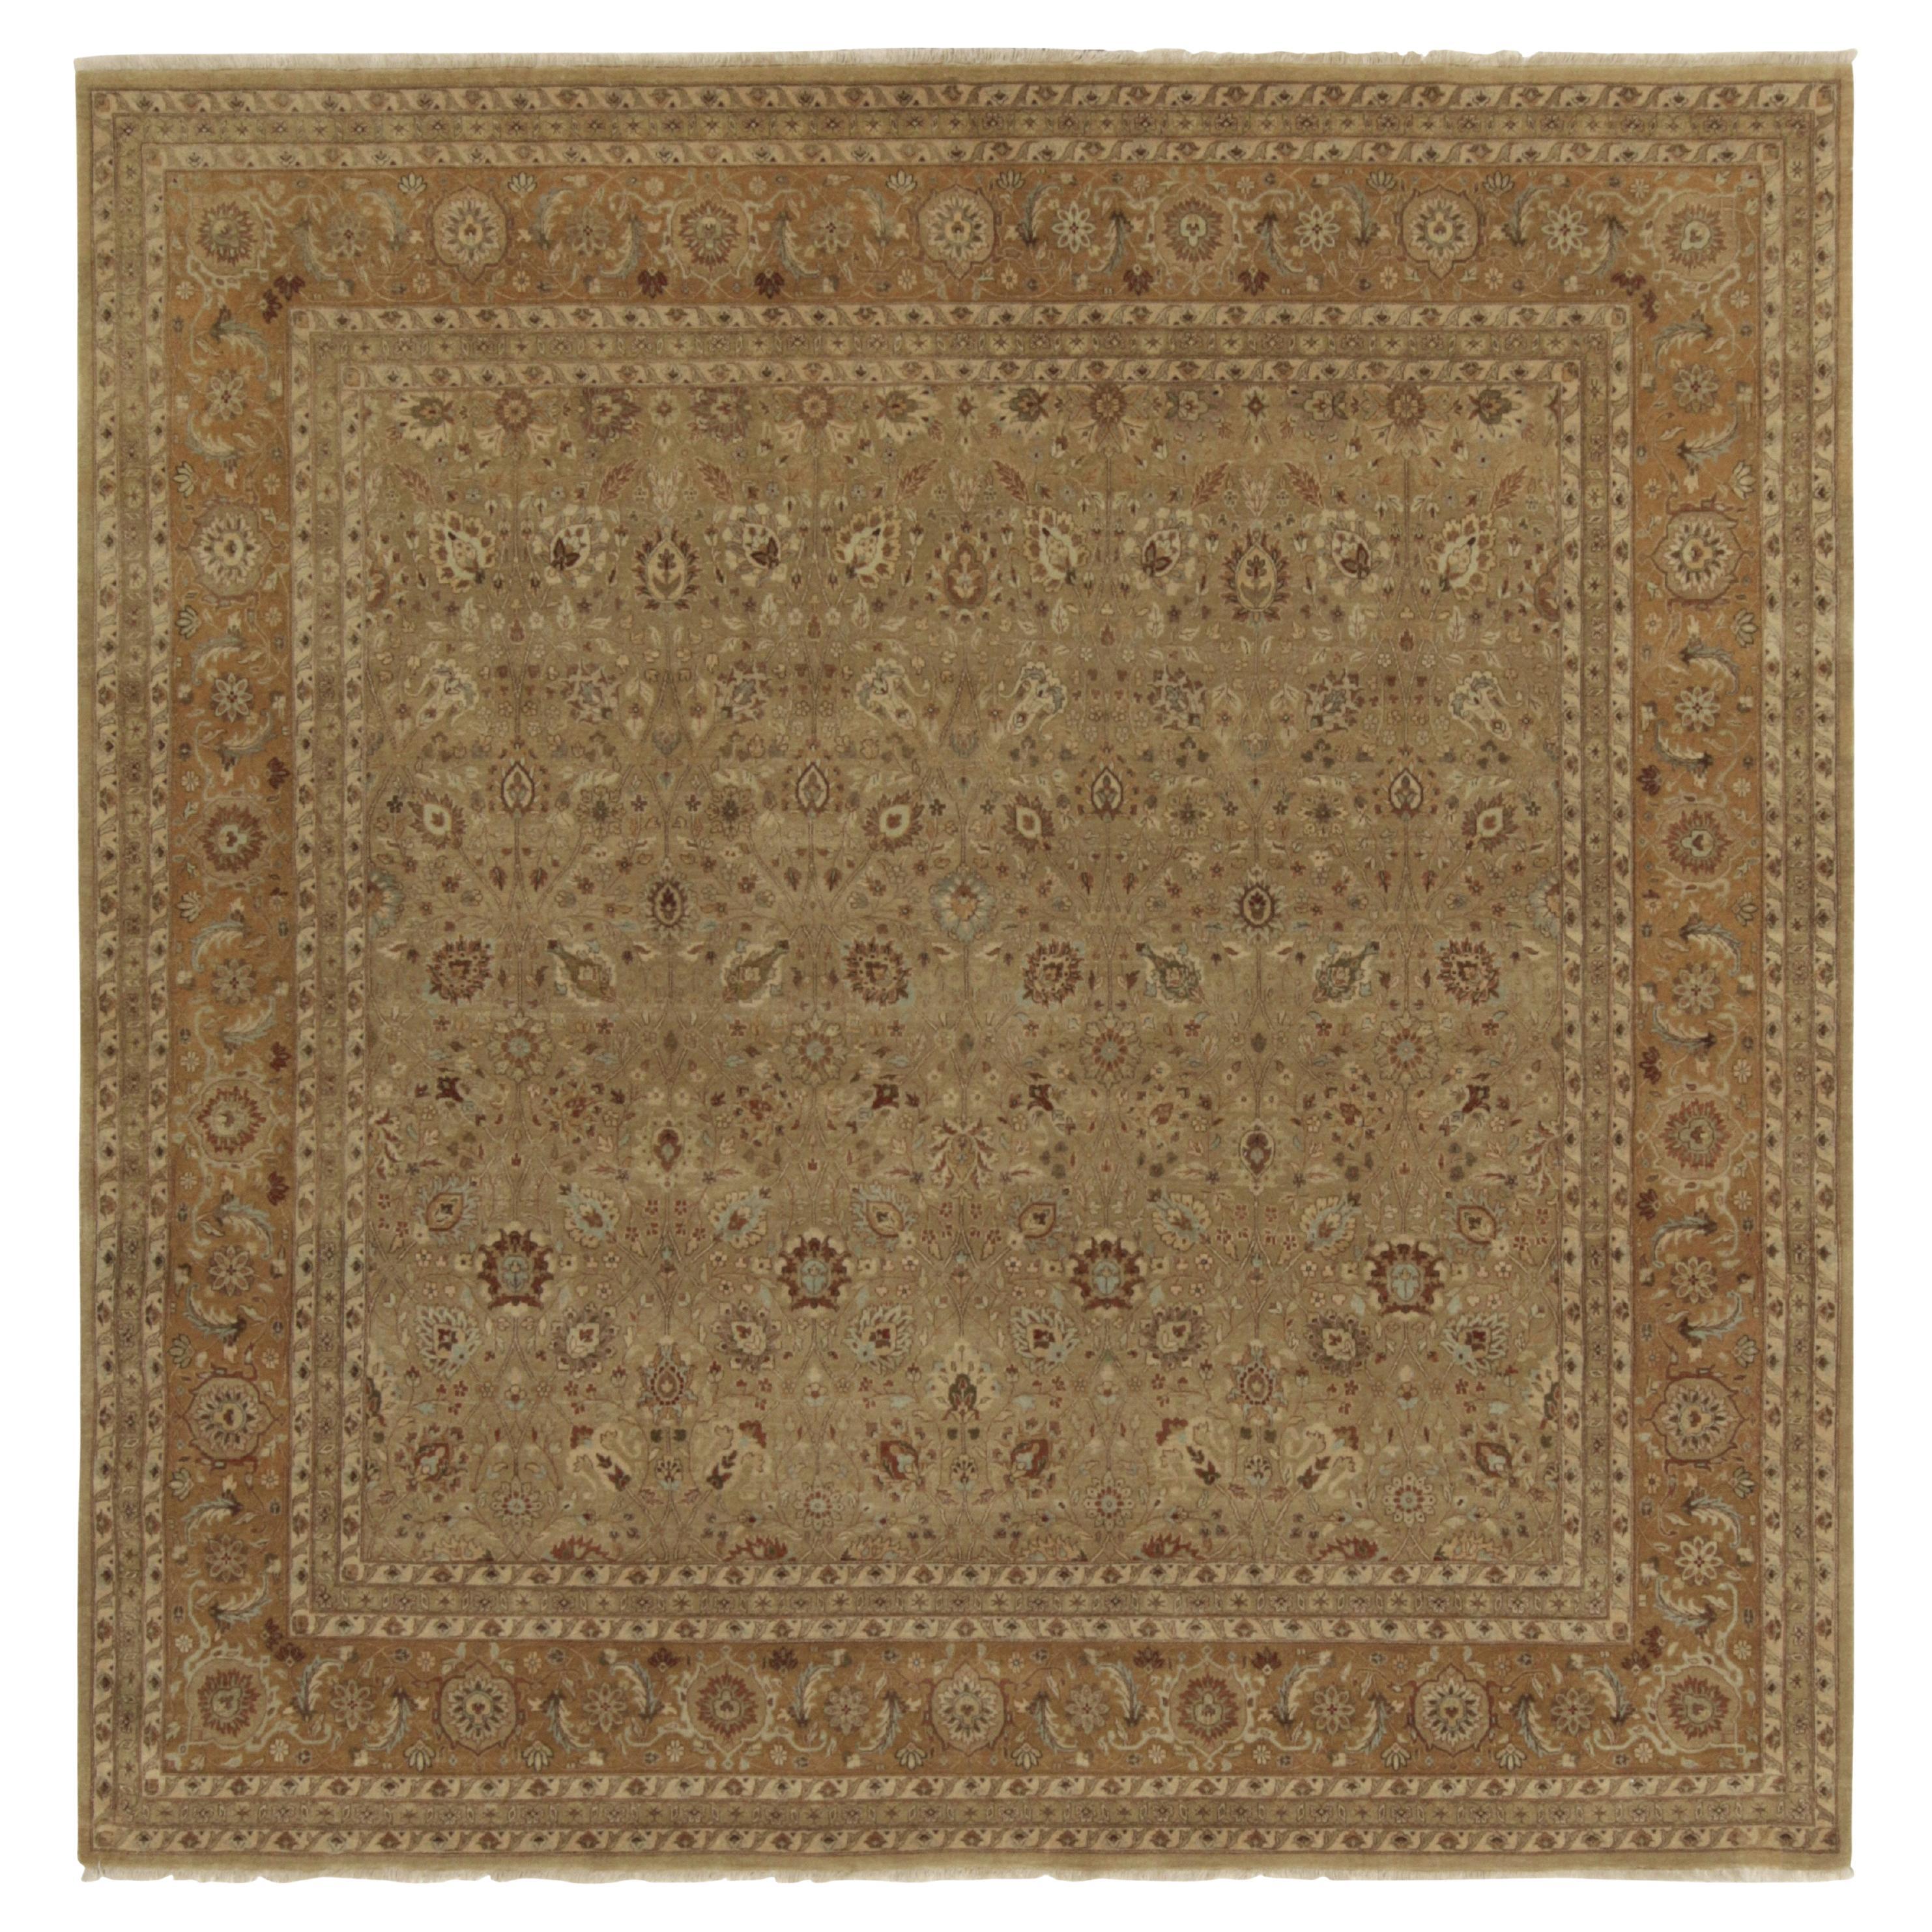 Rug & Kilim’s Antique Persian style Square rug in Beige-Brown Floral Patterns For Sale